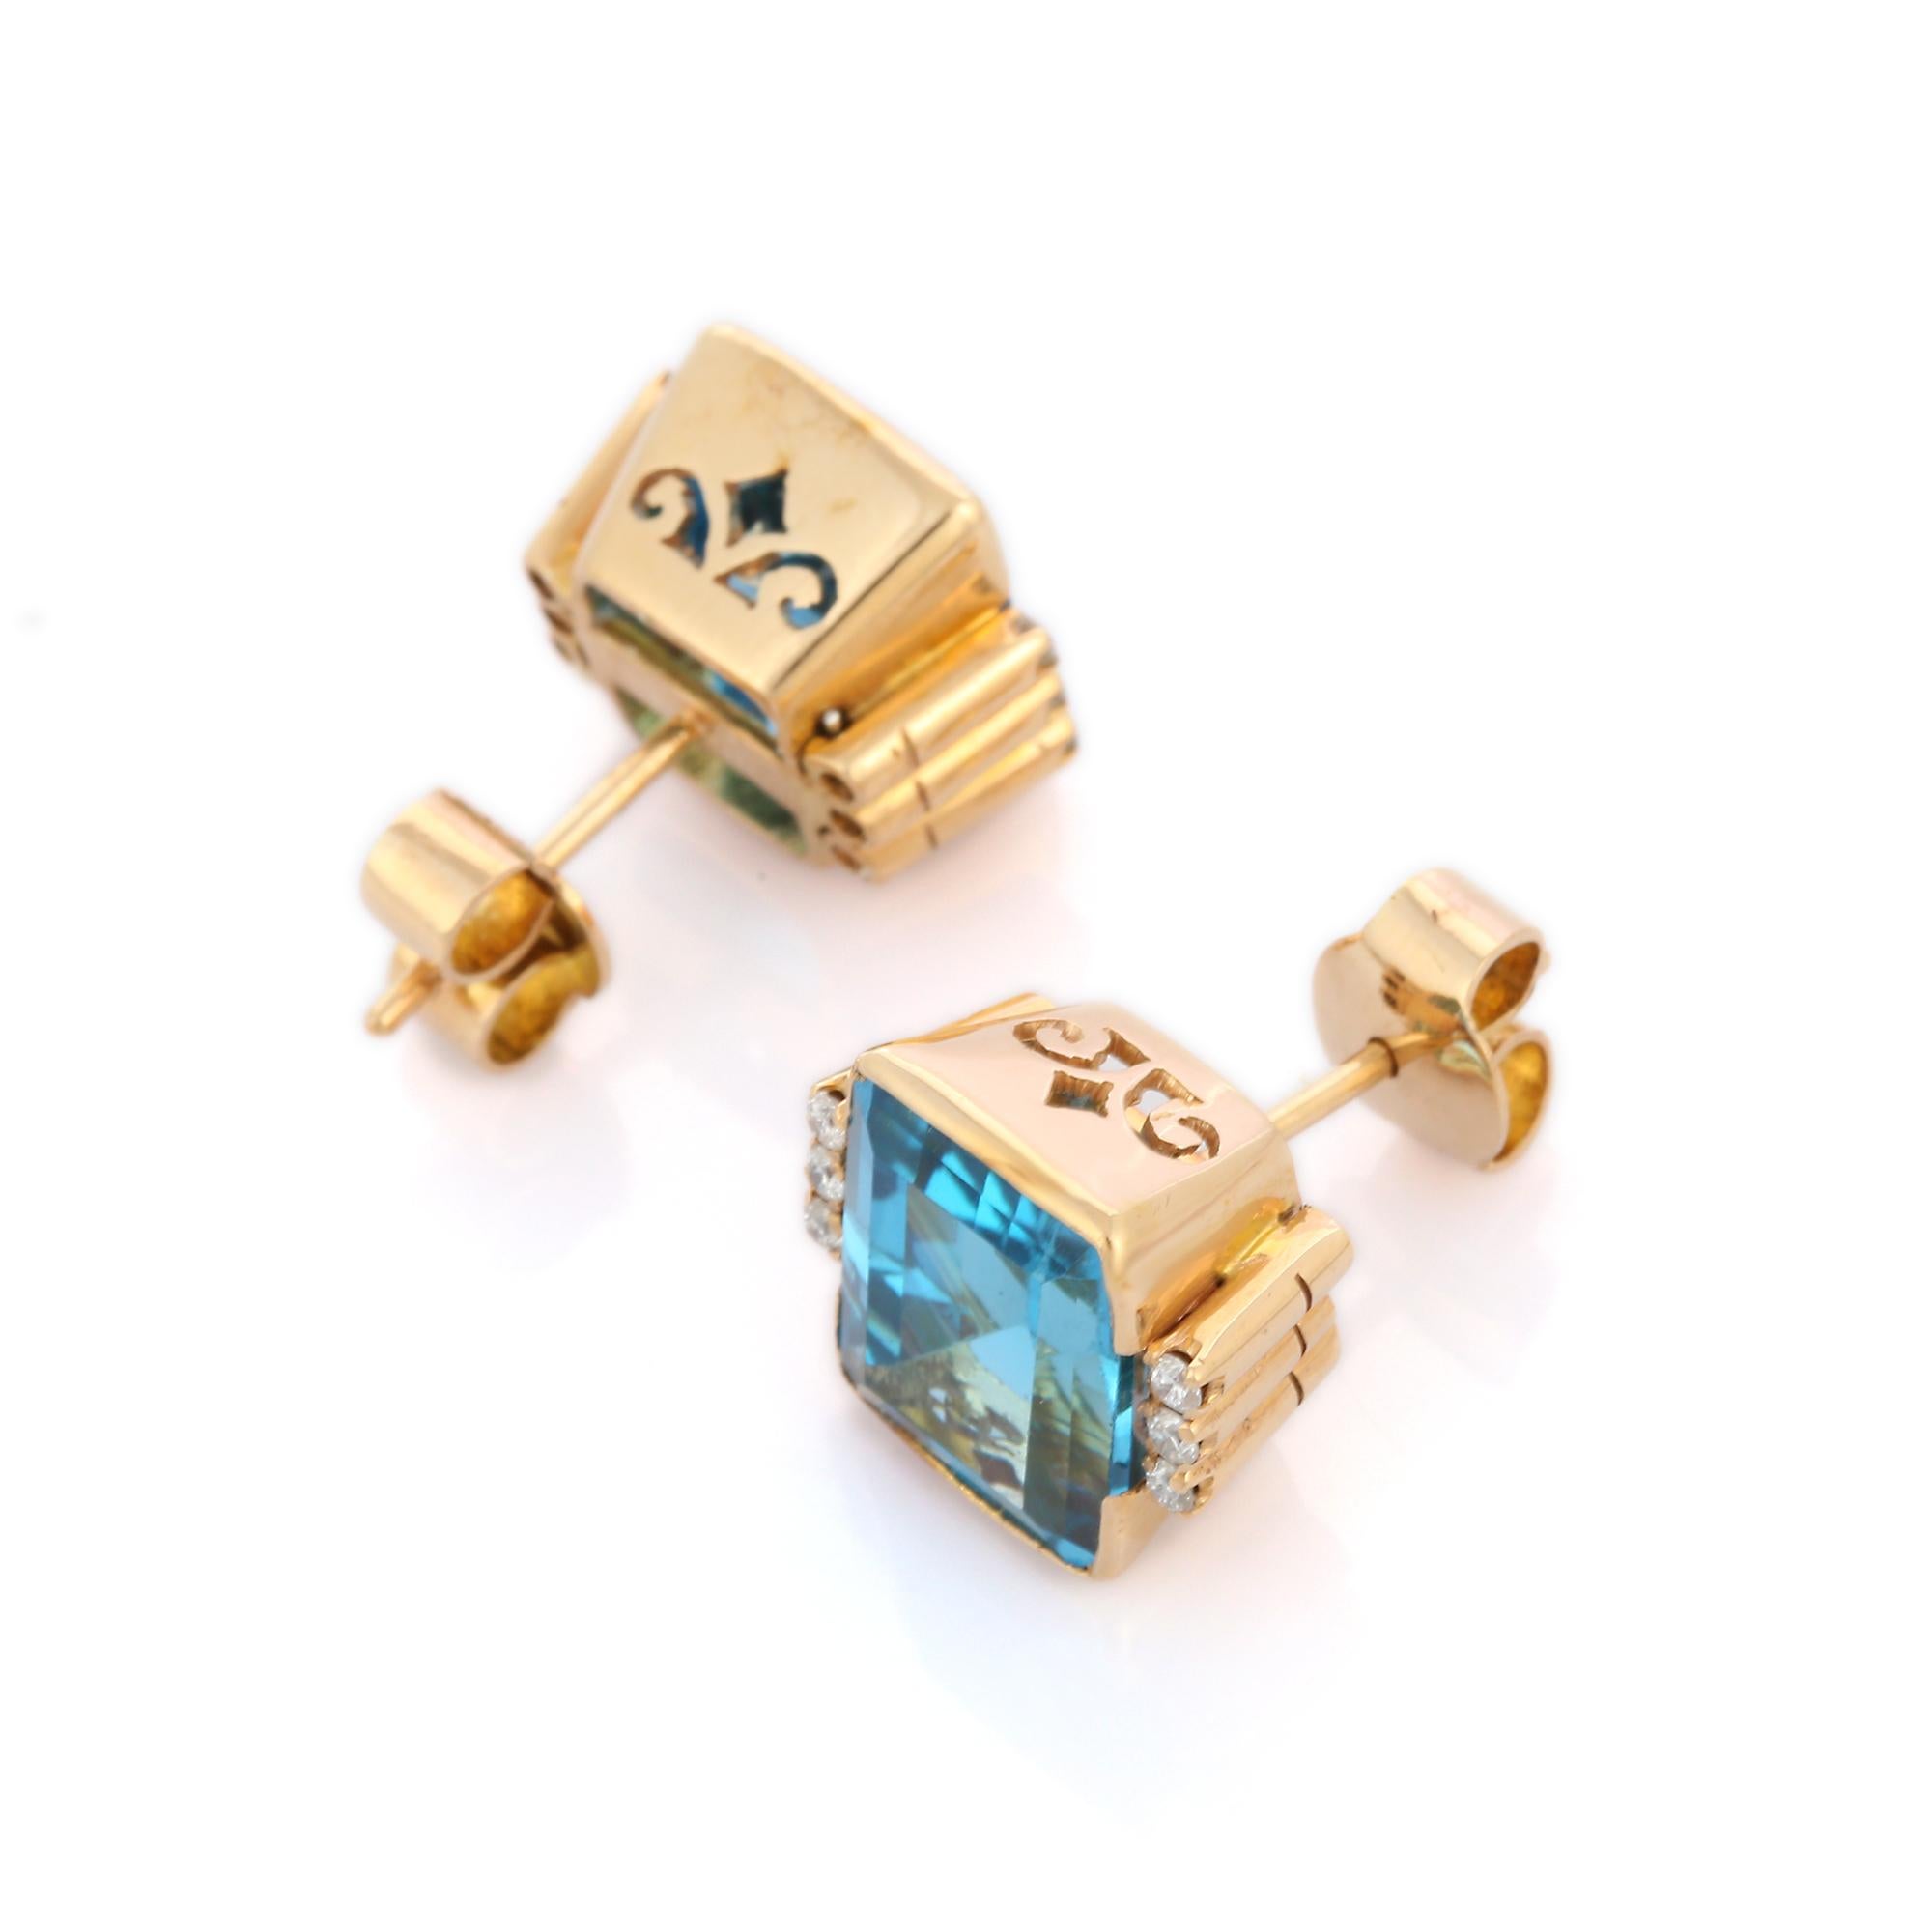 Studs create a subtle beauty while showcasing the colors of the natural precious gemstones and illuminating diamonds making a statement.

Octagon cut blue topaz studs with diamonds in 18K gold. Embrace your look with these stunning pair of earrings